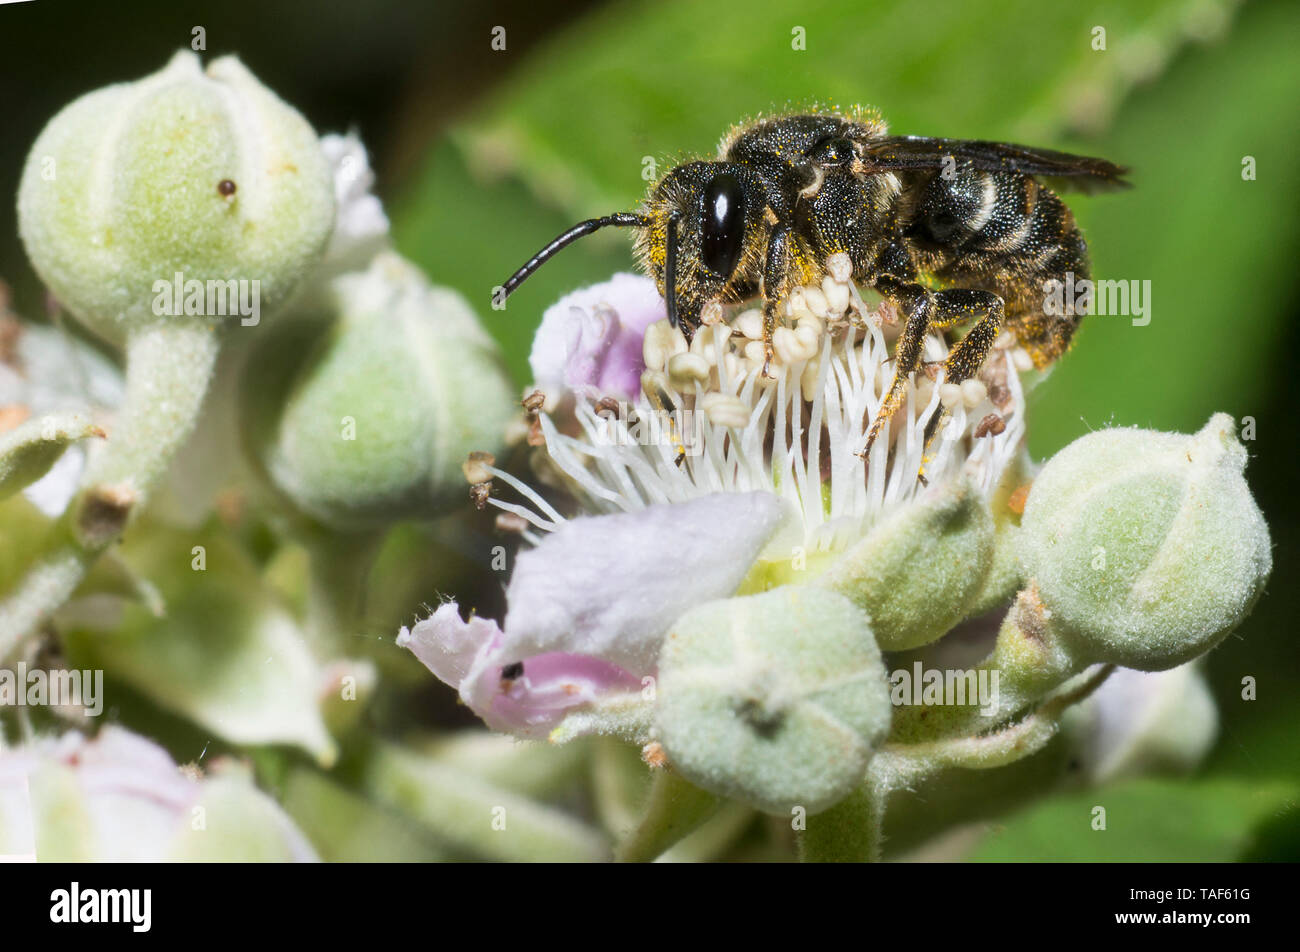 Little Dark-bee (Stelis breviuscula) on Mulberry tree (Rubus fructicosus), Regional Natural Park of Northern Vosges, France Stock Photo